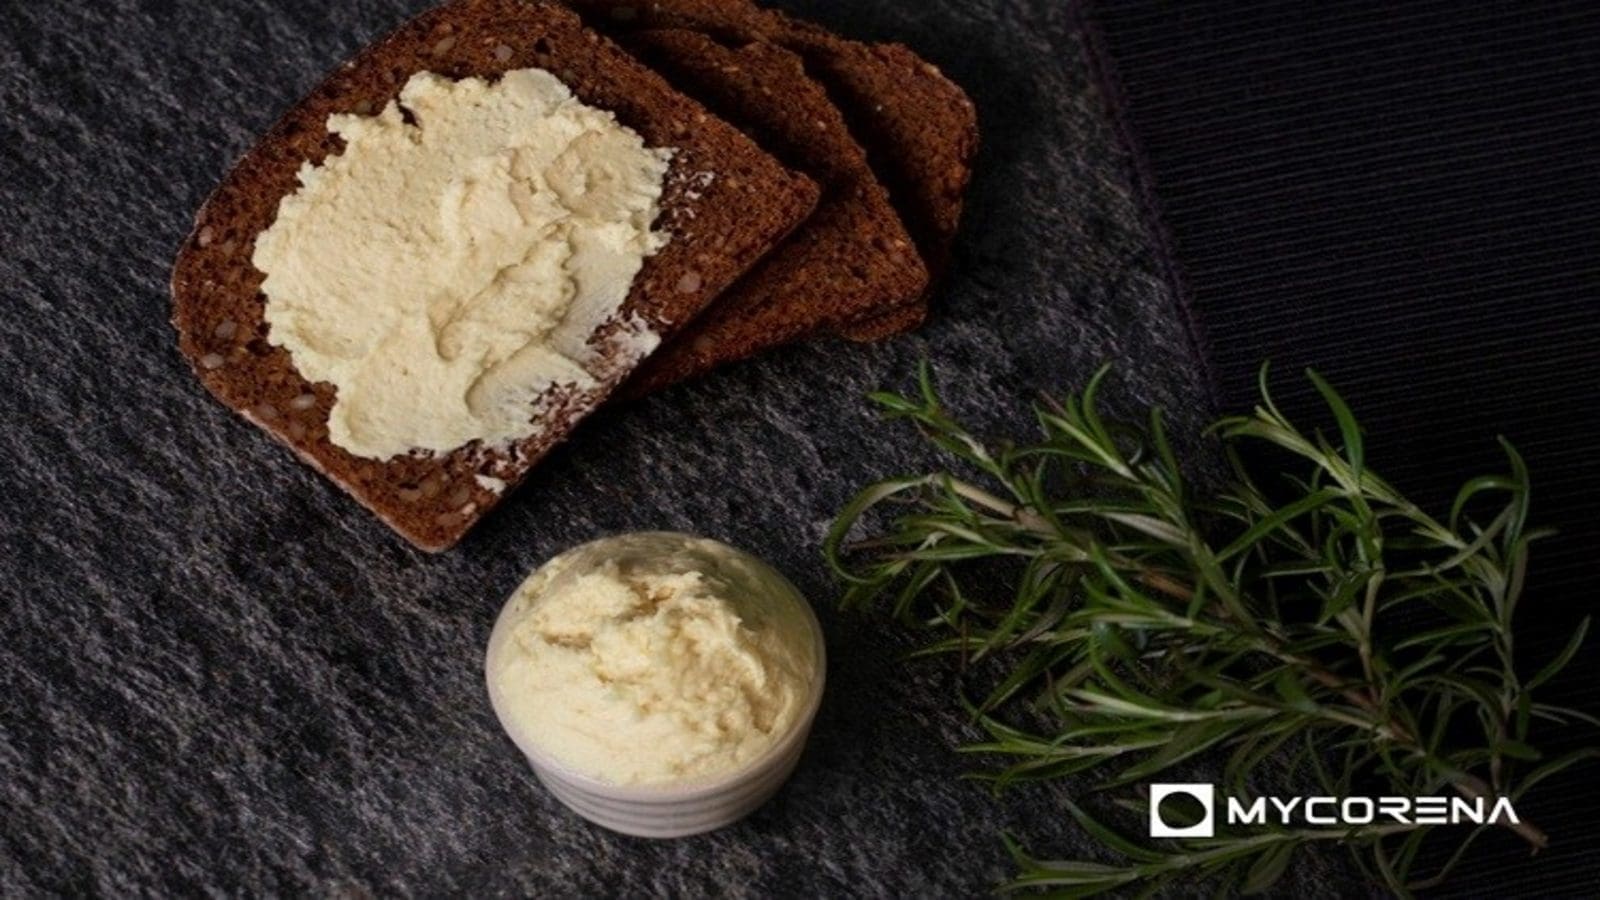 Mycorena expands into alt dairy applications, develops mycoprotein-based butter prototype